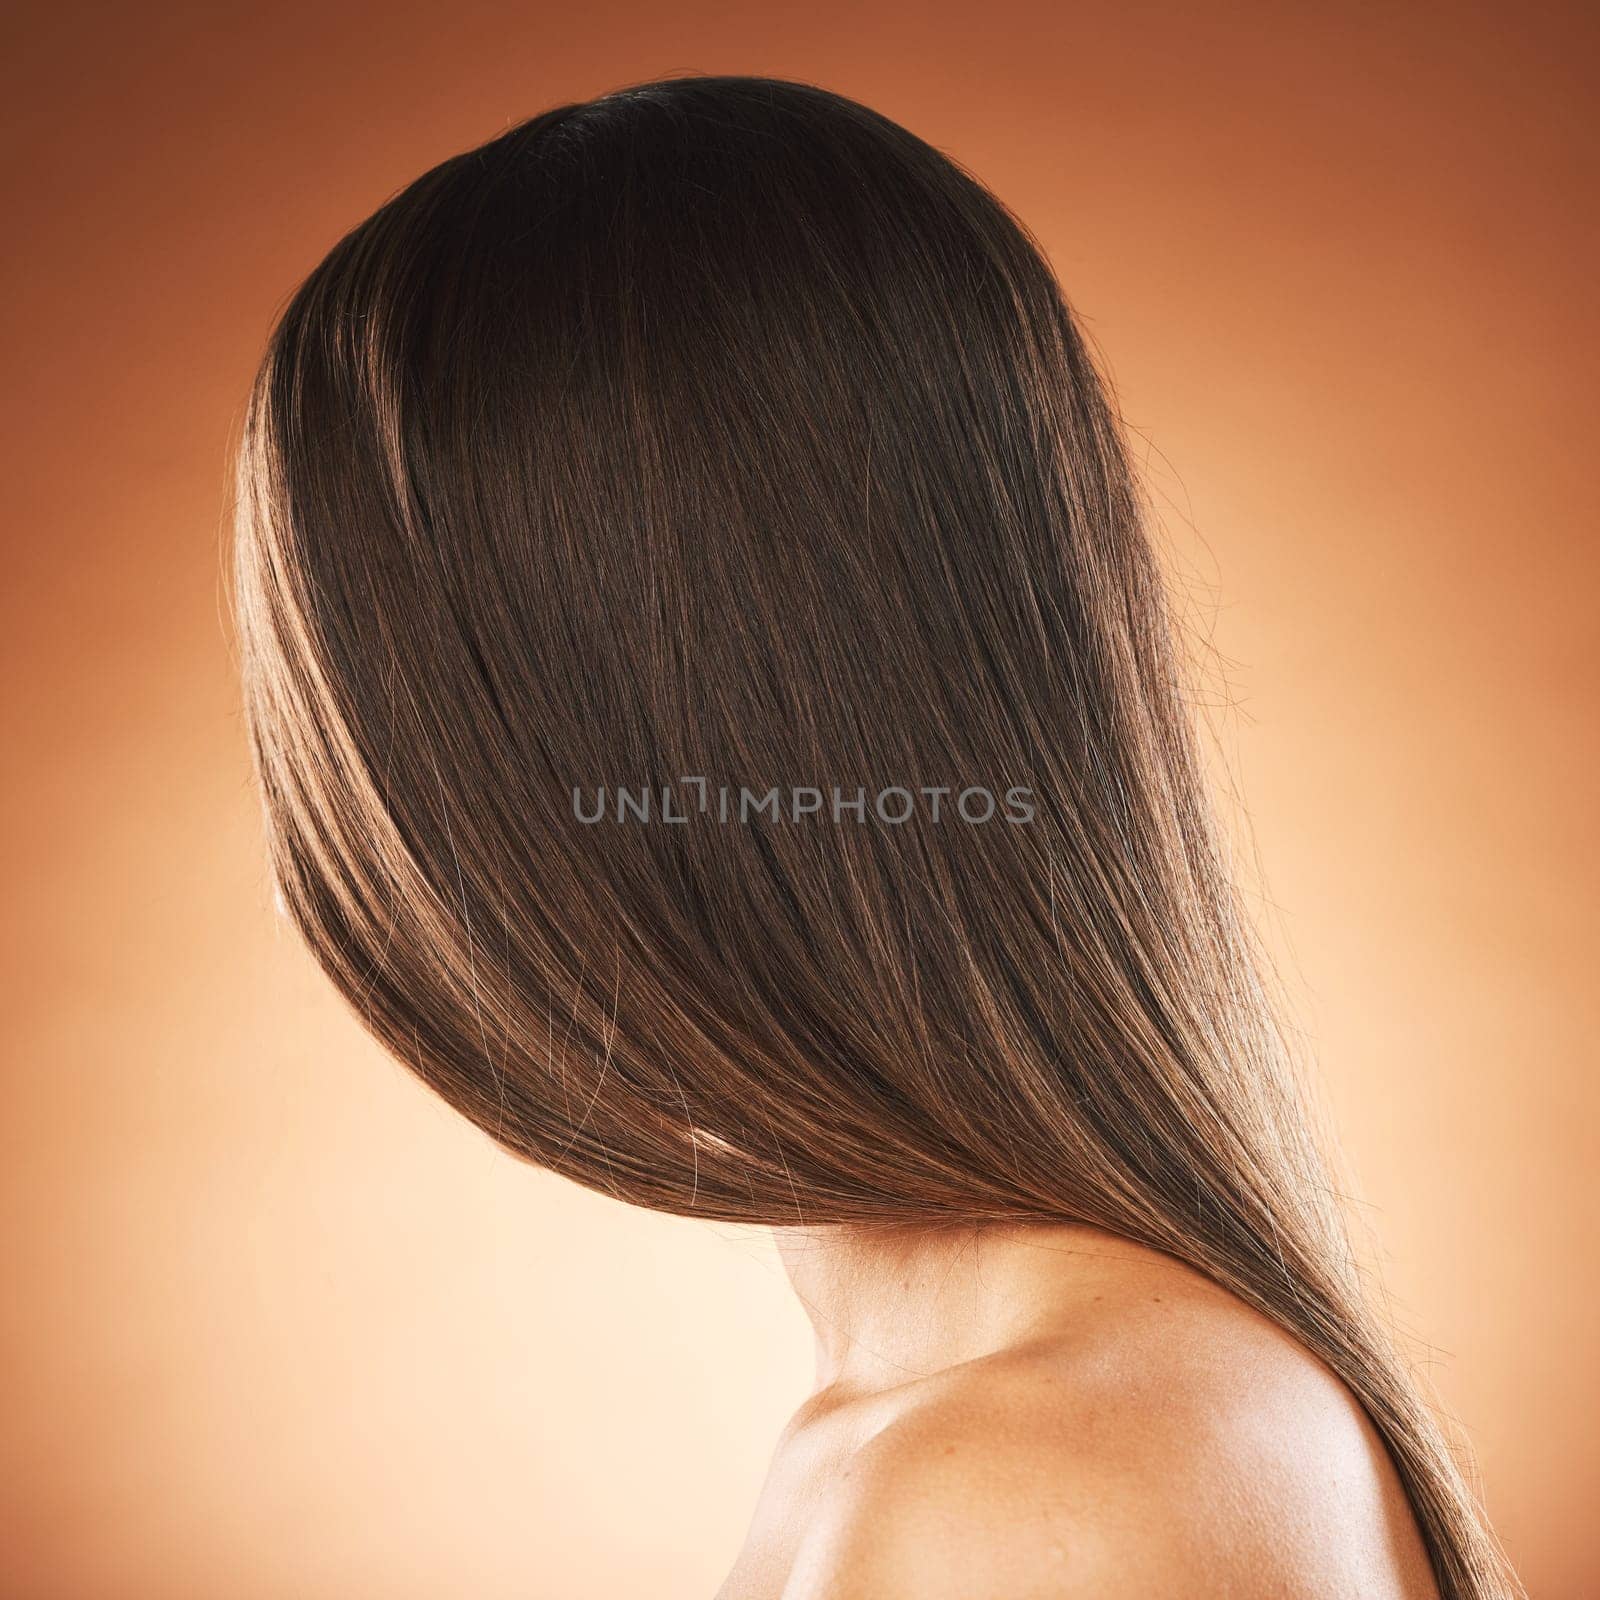 Woman, texture or hair style on orange studio background in keratin treatment marketing, Brazilian straightening advertising or self care. Model headshot, brunette color aesthetic or mockup backdrop.